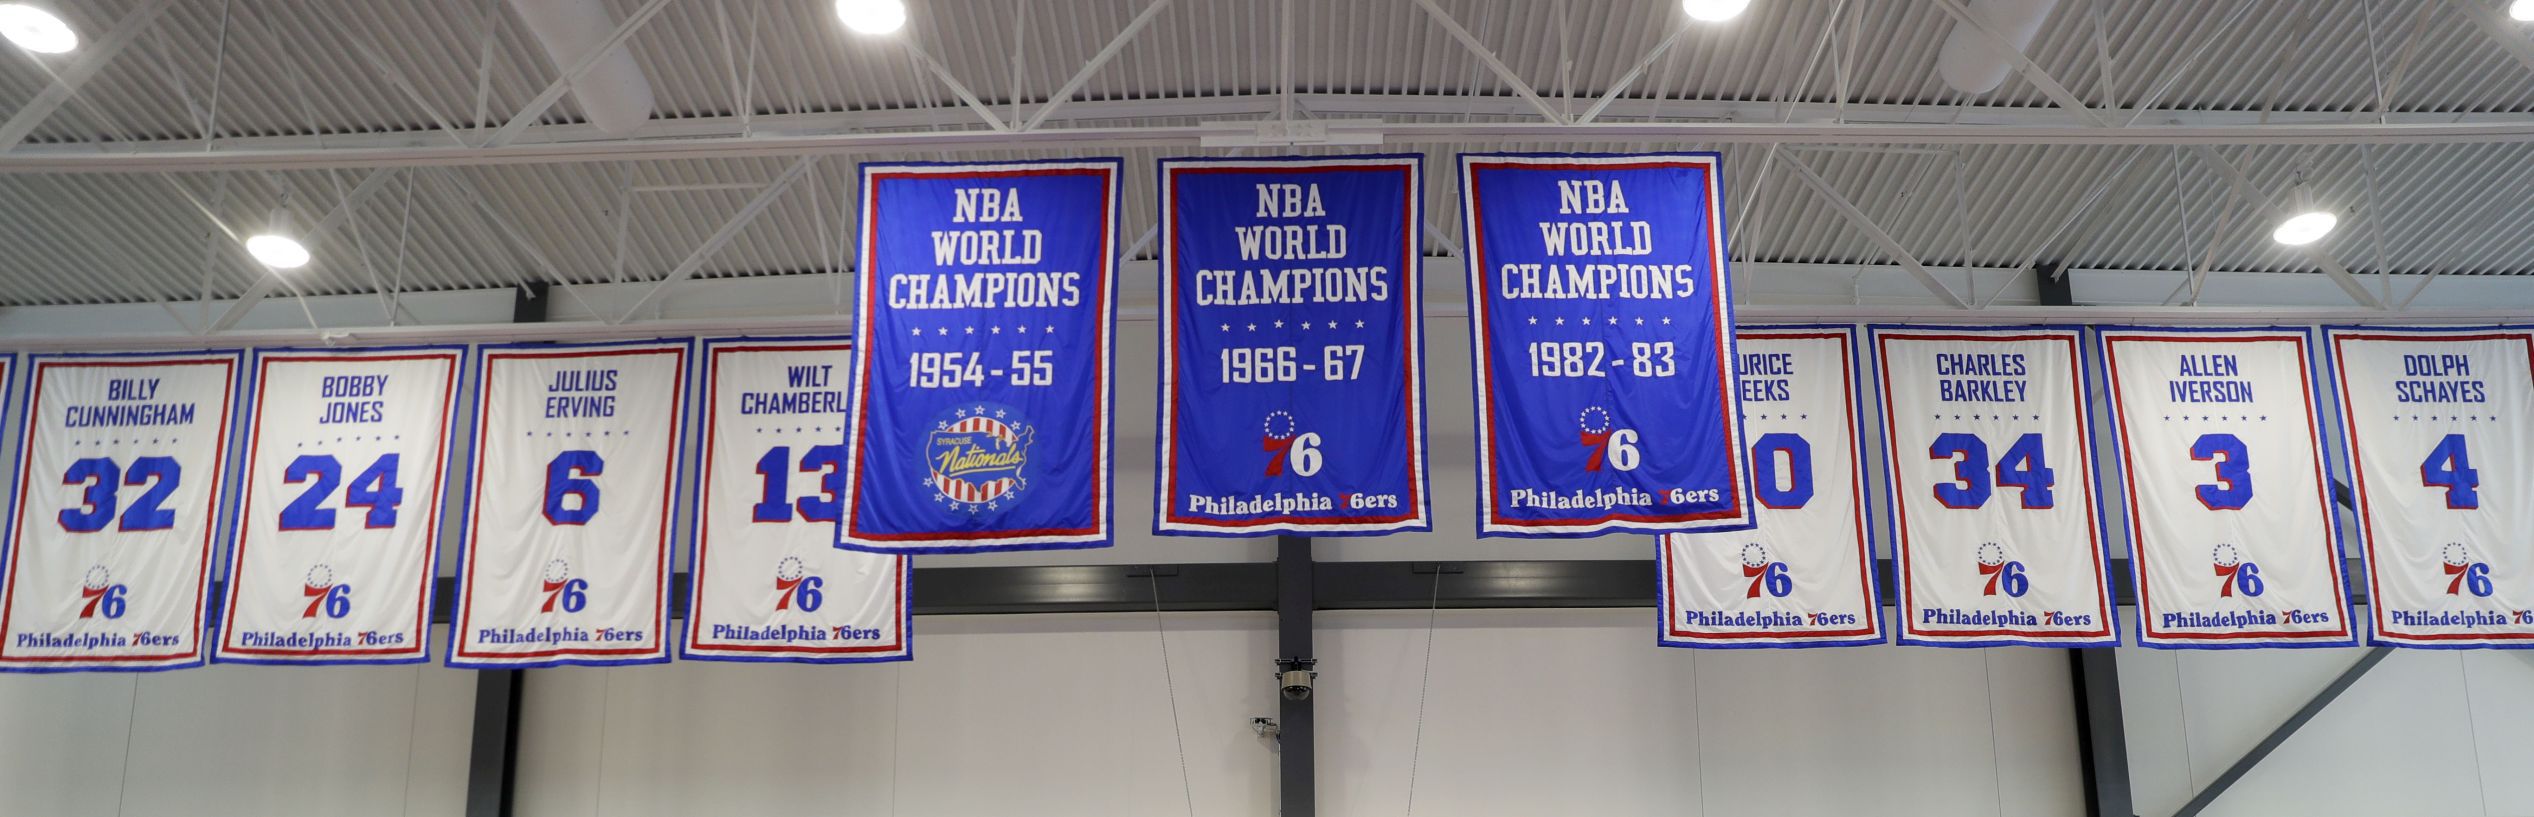 sixers retired numbers